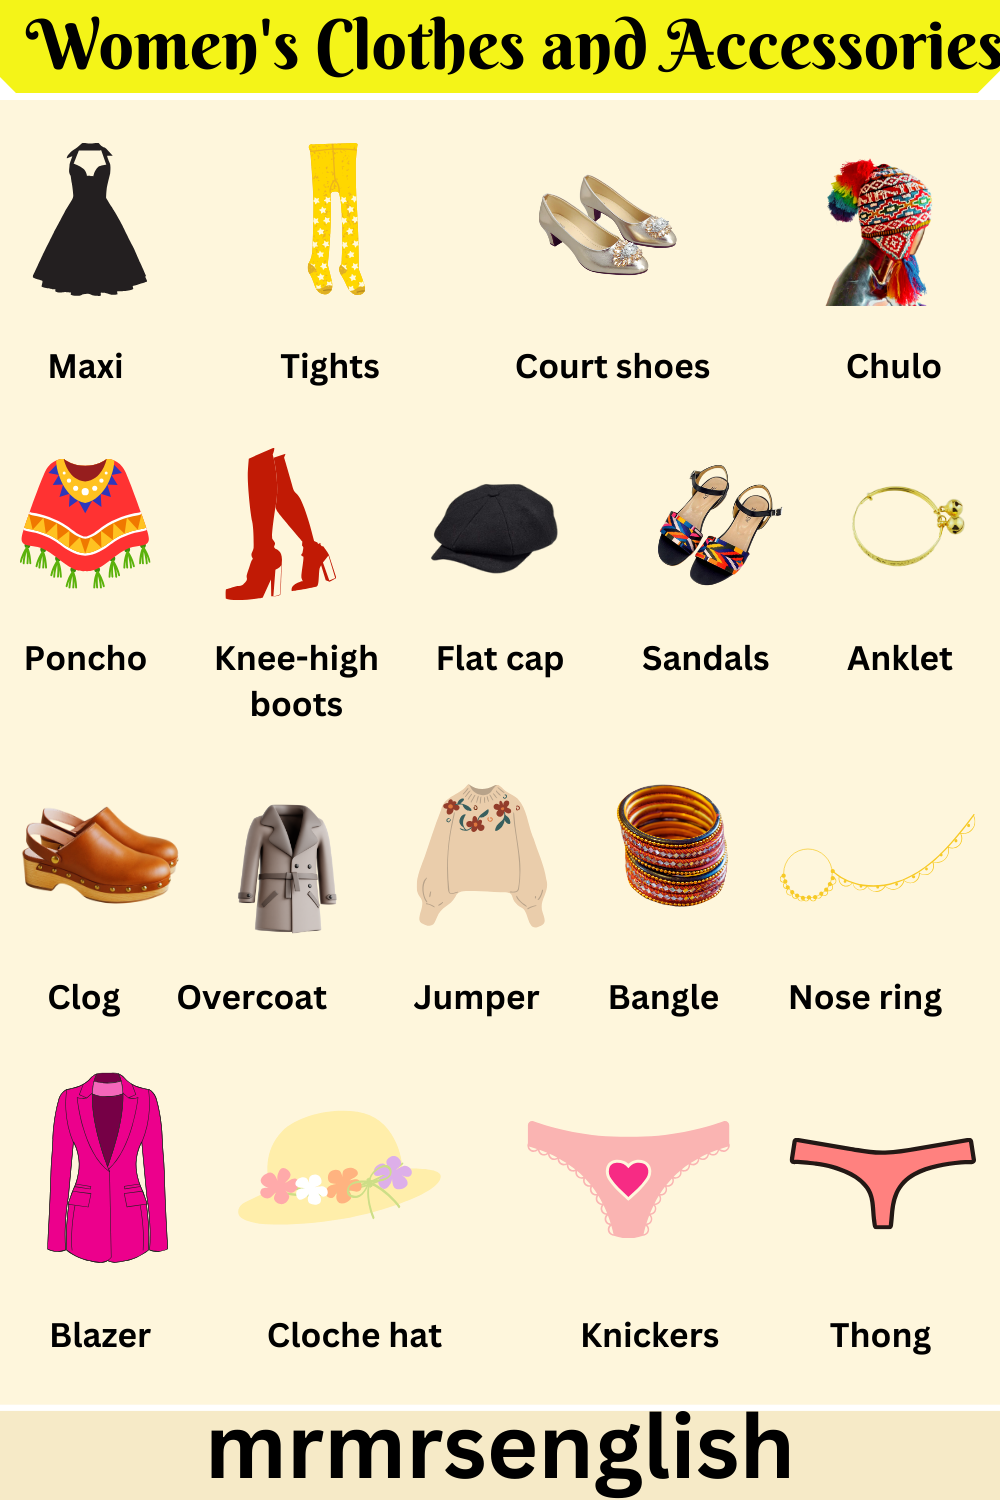 Women's Clothes and Accessories Names